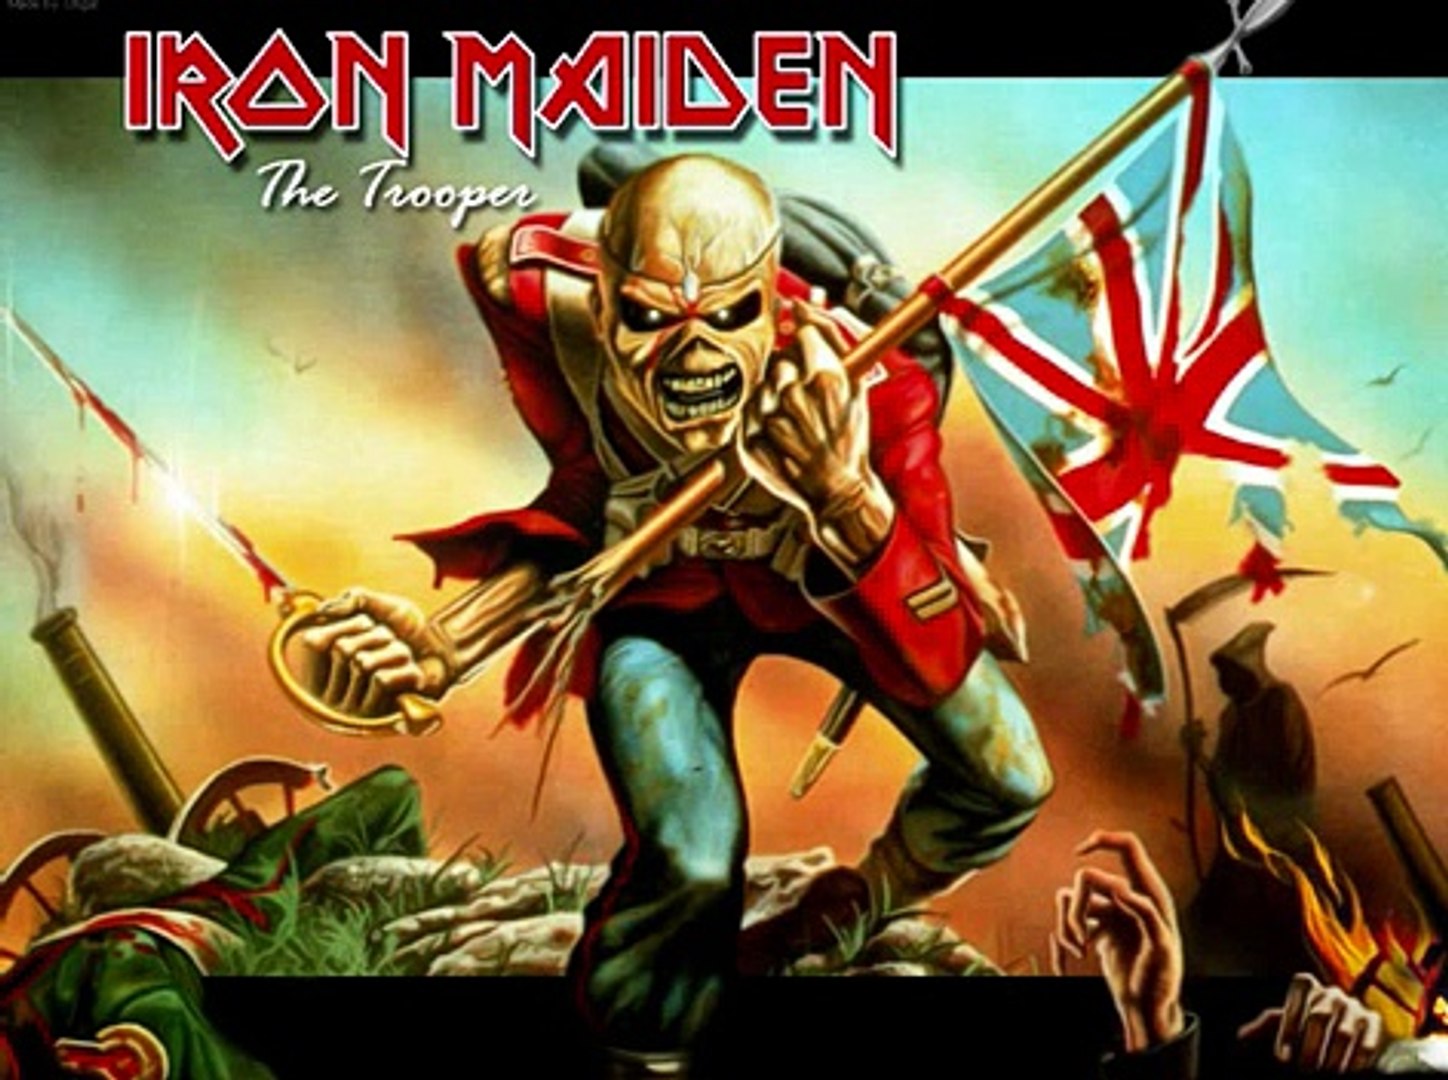 iron maiden (The trooper) - video Dailymotion